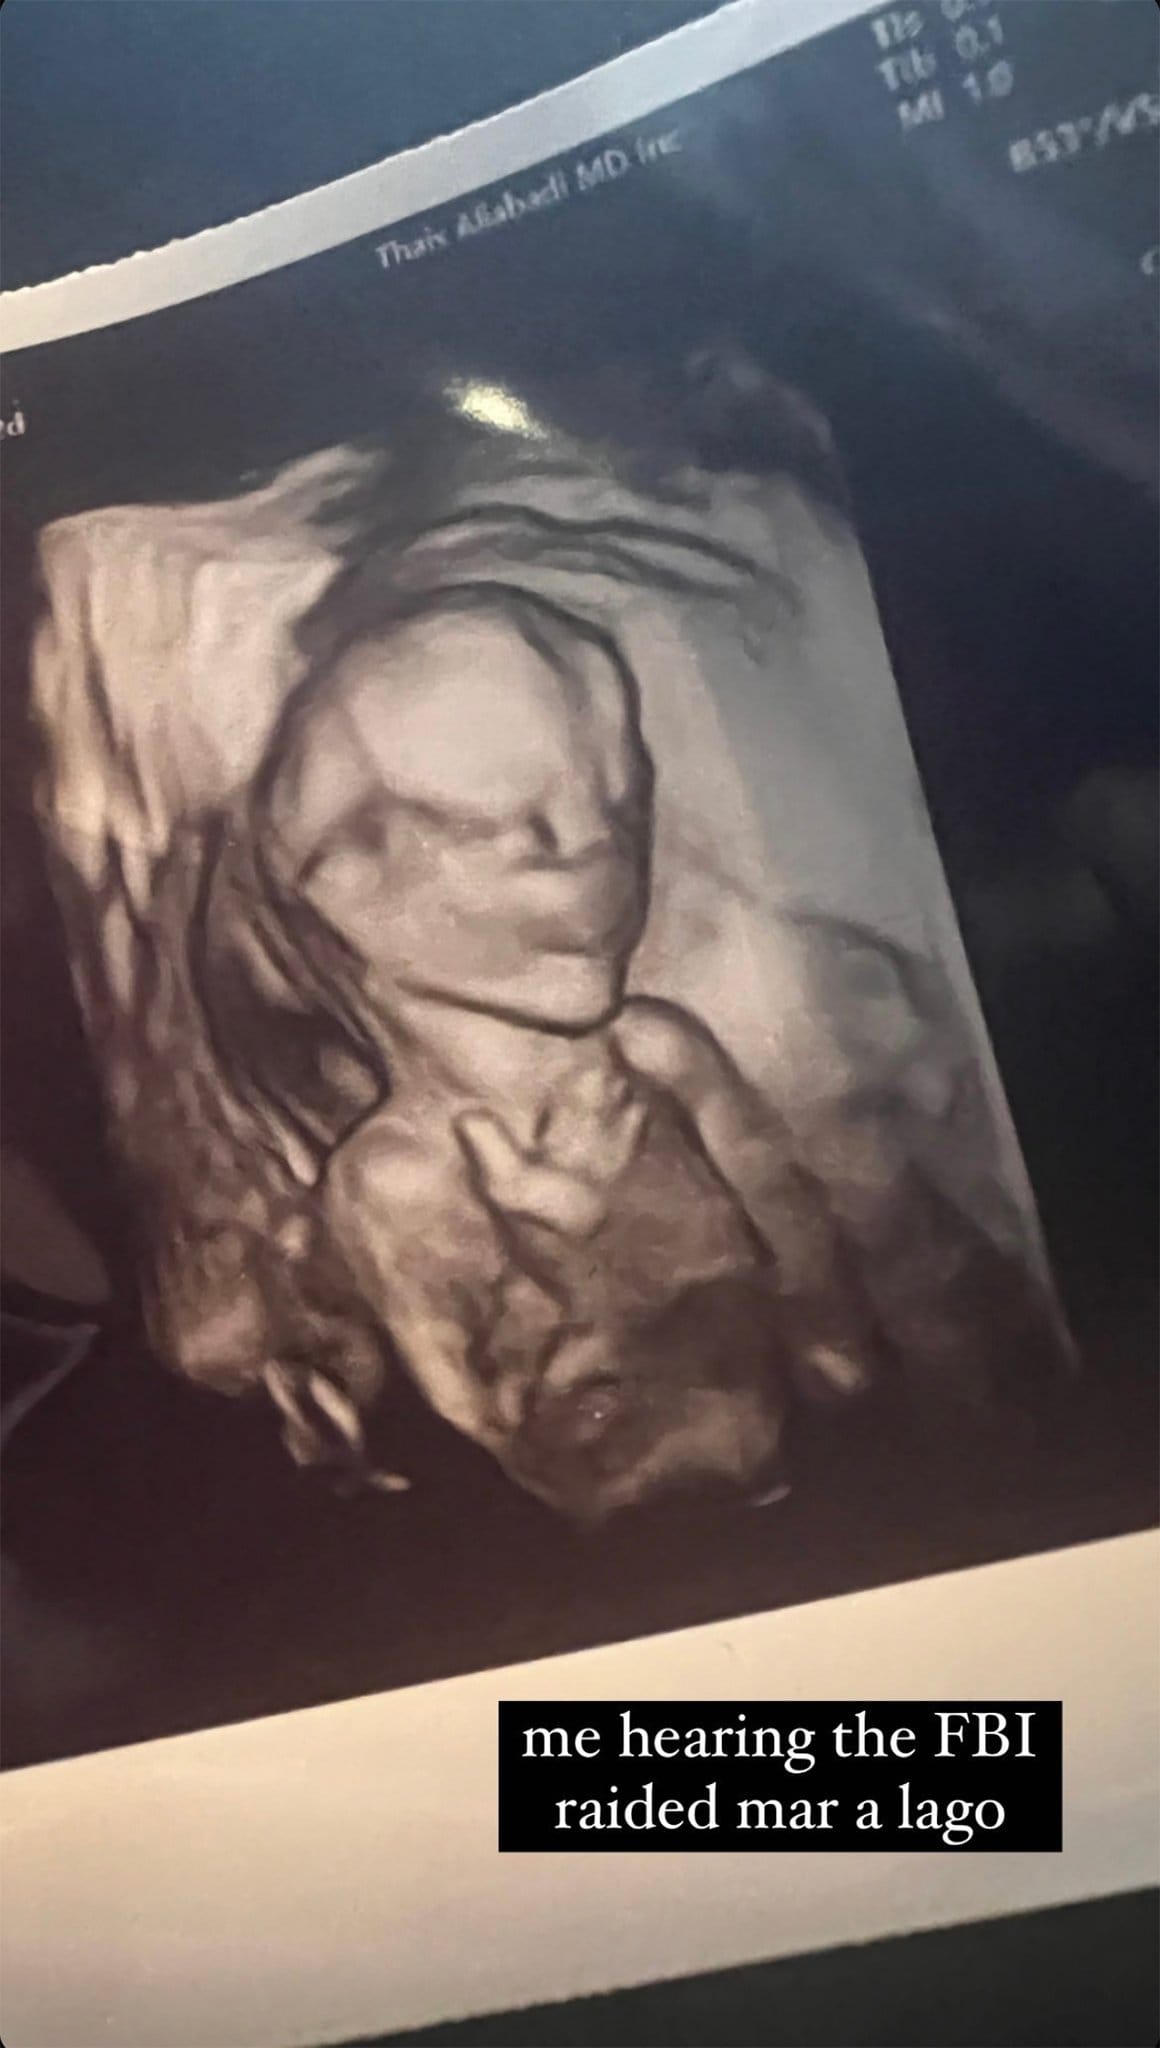 Chrissy Teigen shares an ultrasound image of her third baby and references news about Trump's Mar-A-Lago estate raid in her caption